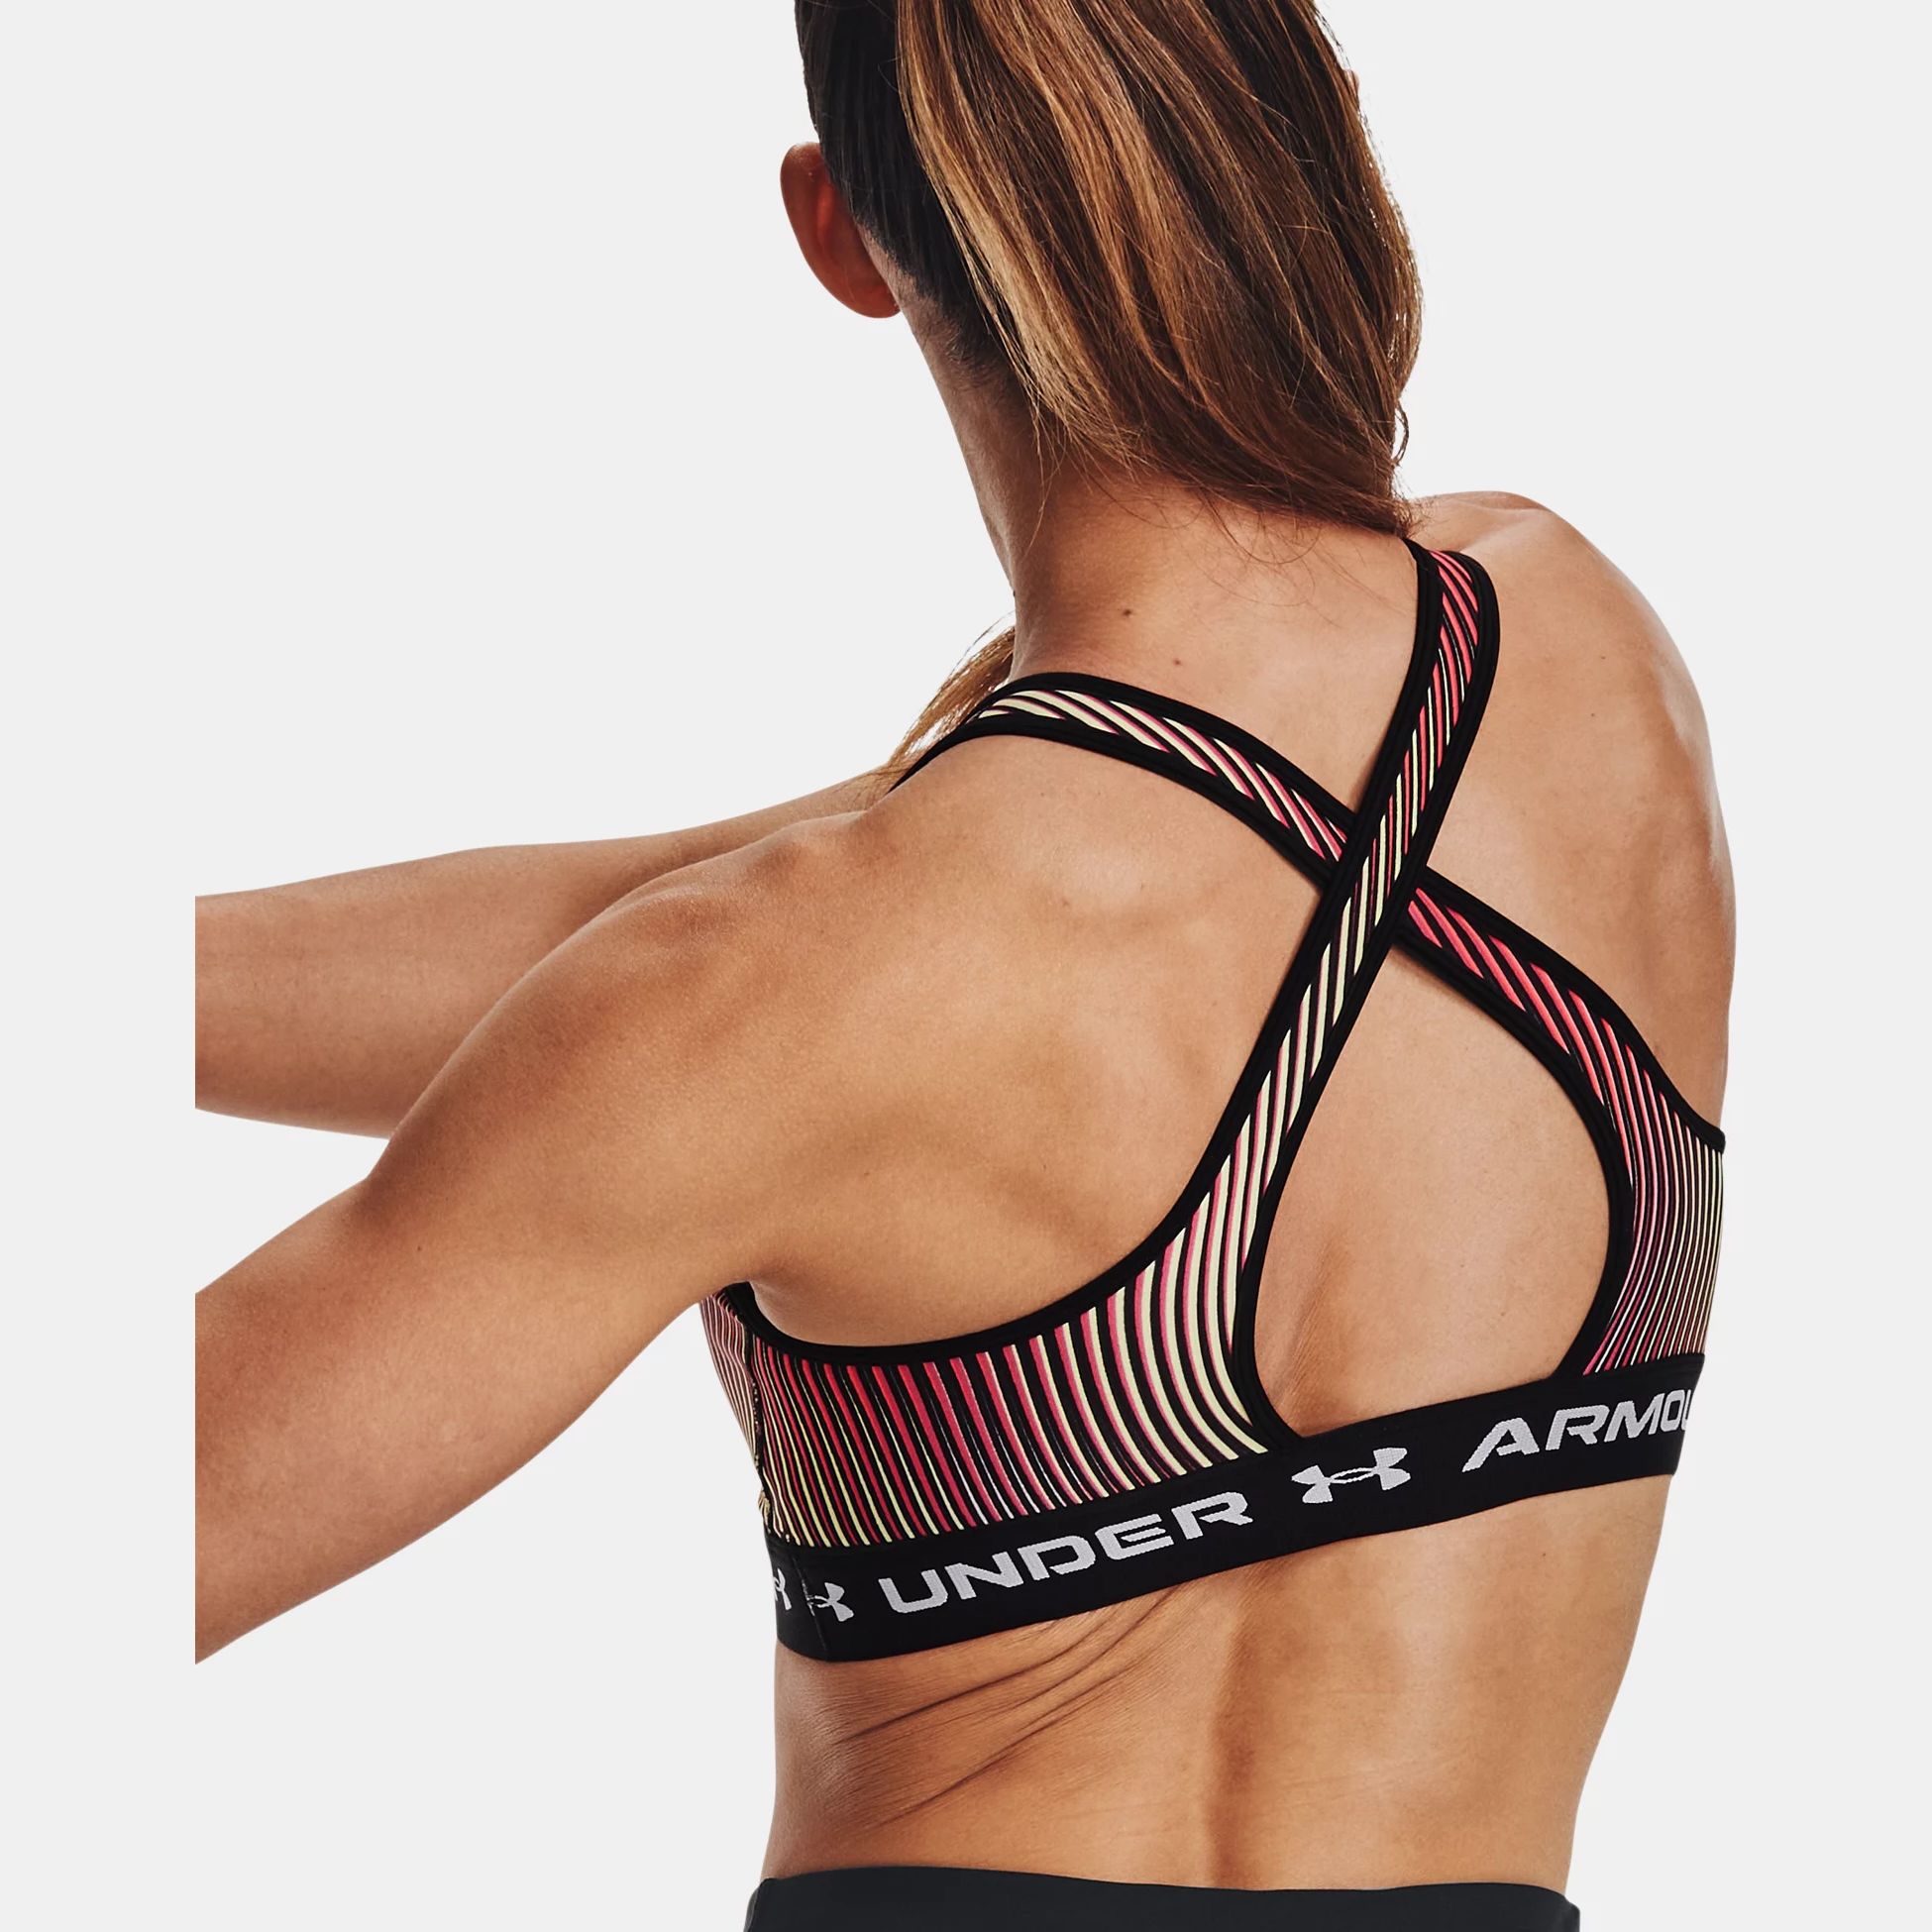 Under armour Bustier Top black-white printed lettering athletic style Fashion Tops Bustier Tops 